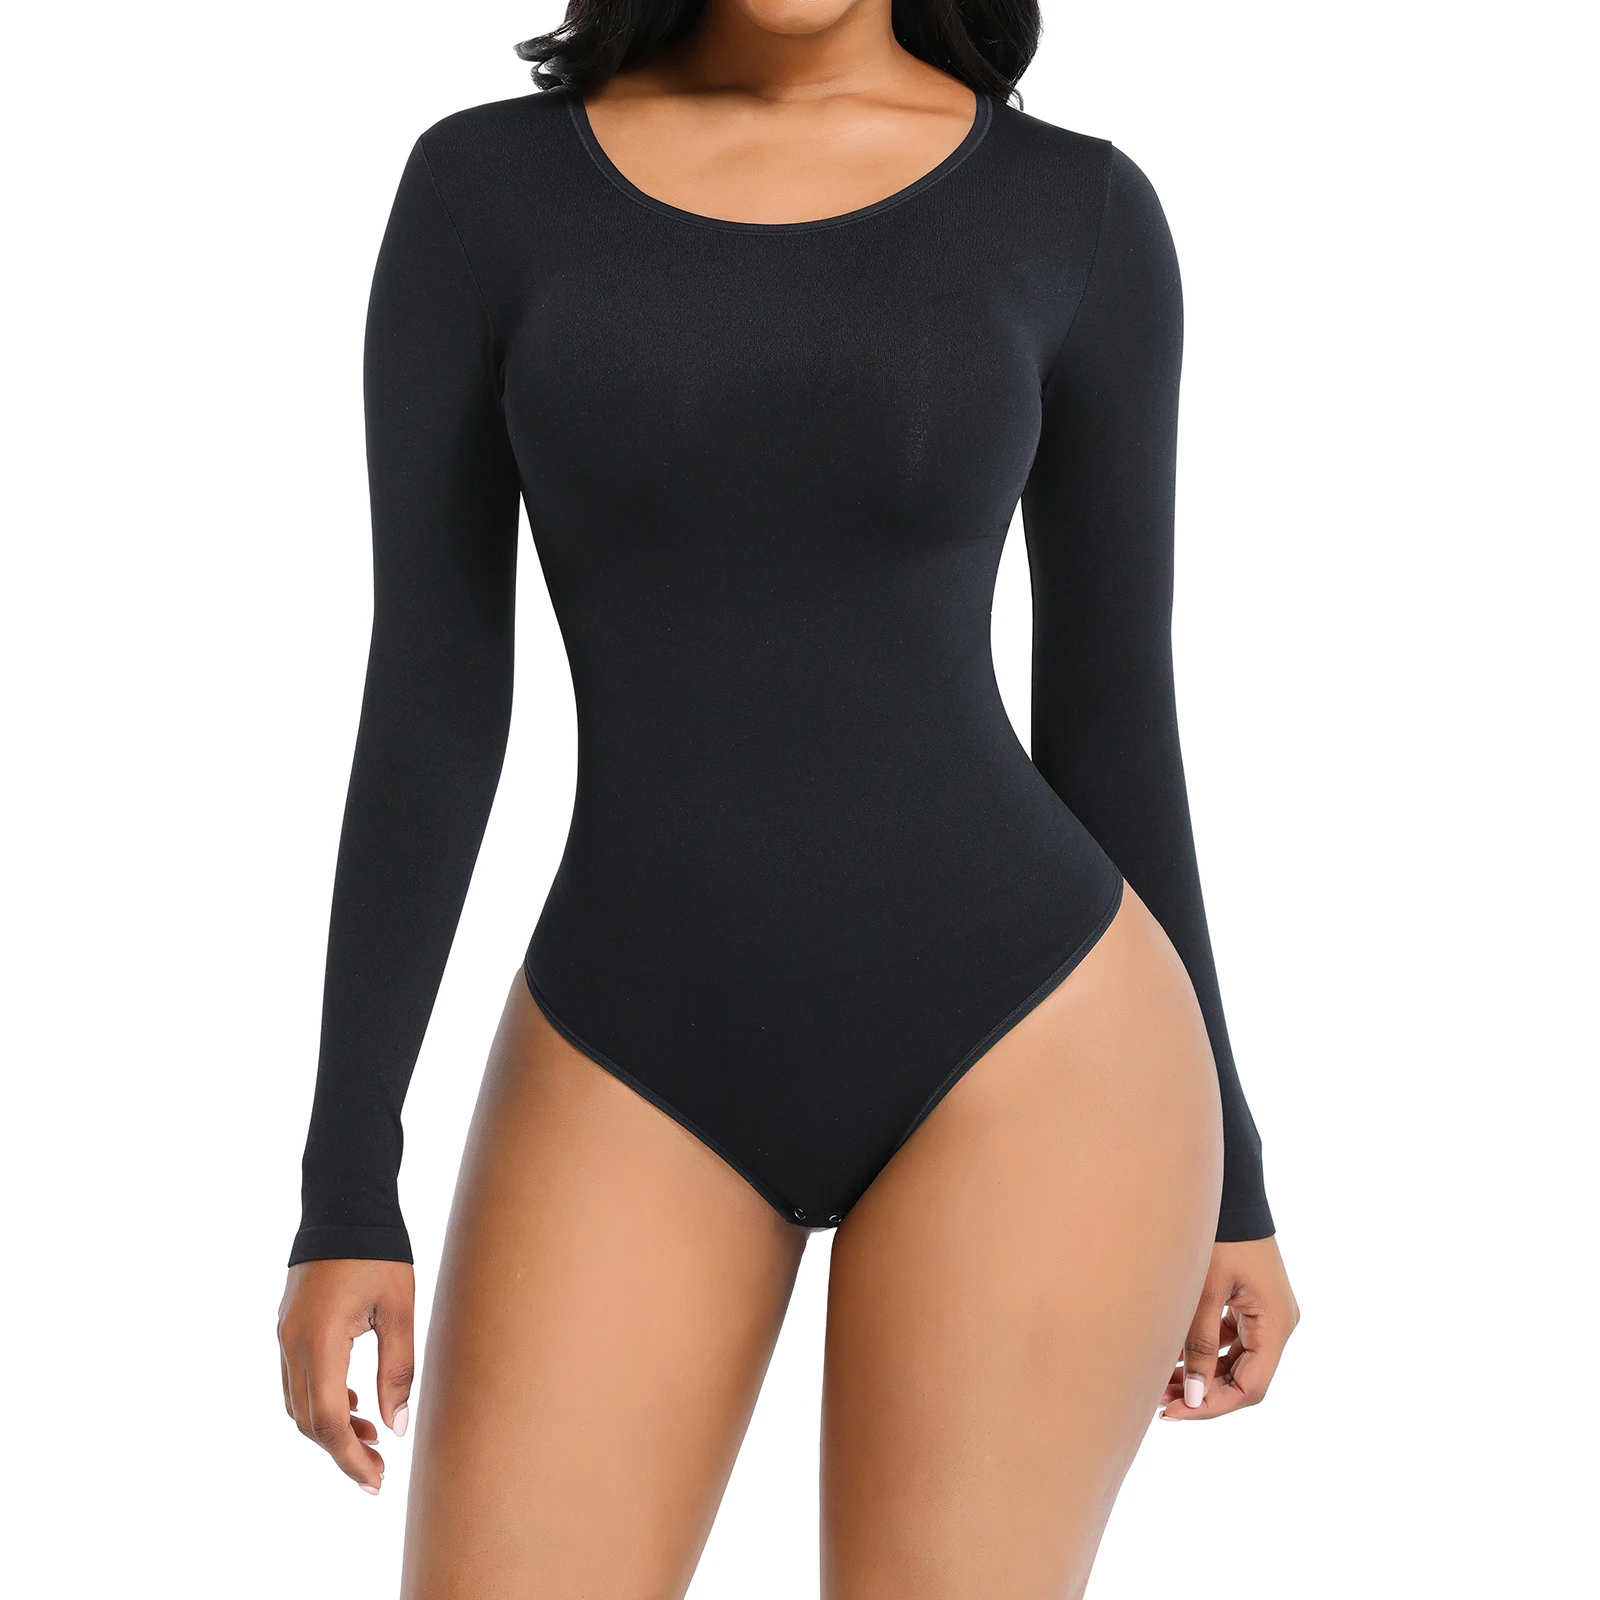 Invisible Long Sleeved Thong Shaper